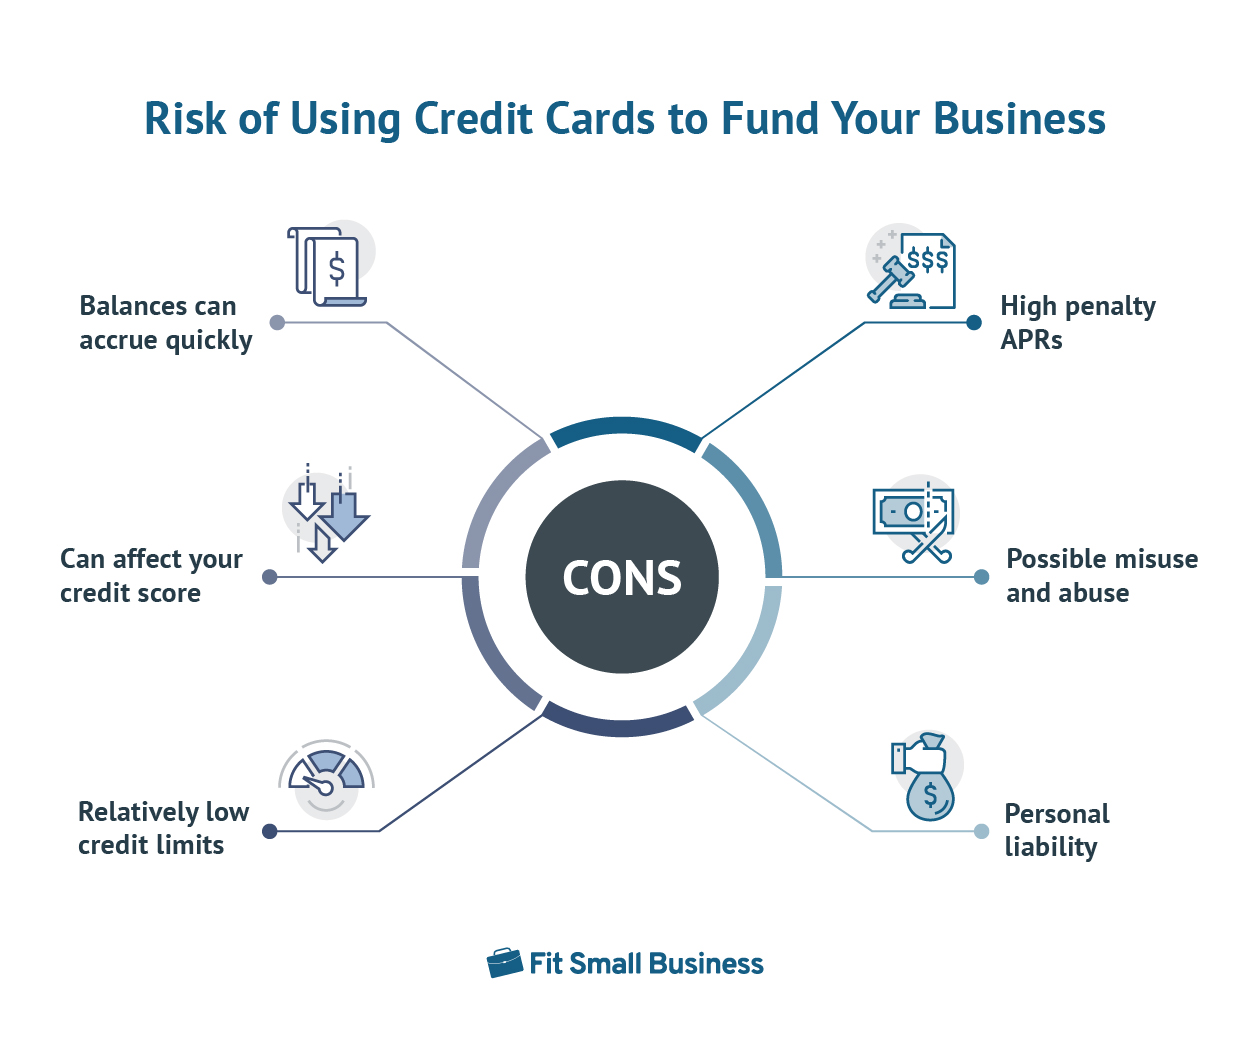 Risk of Using Credit Cards to Fund Your Business